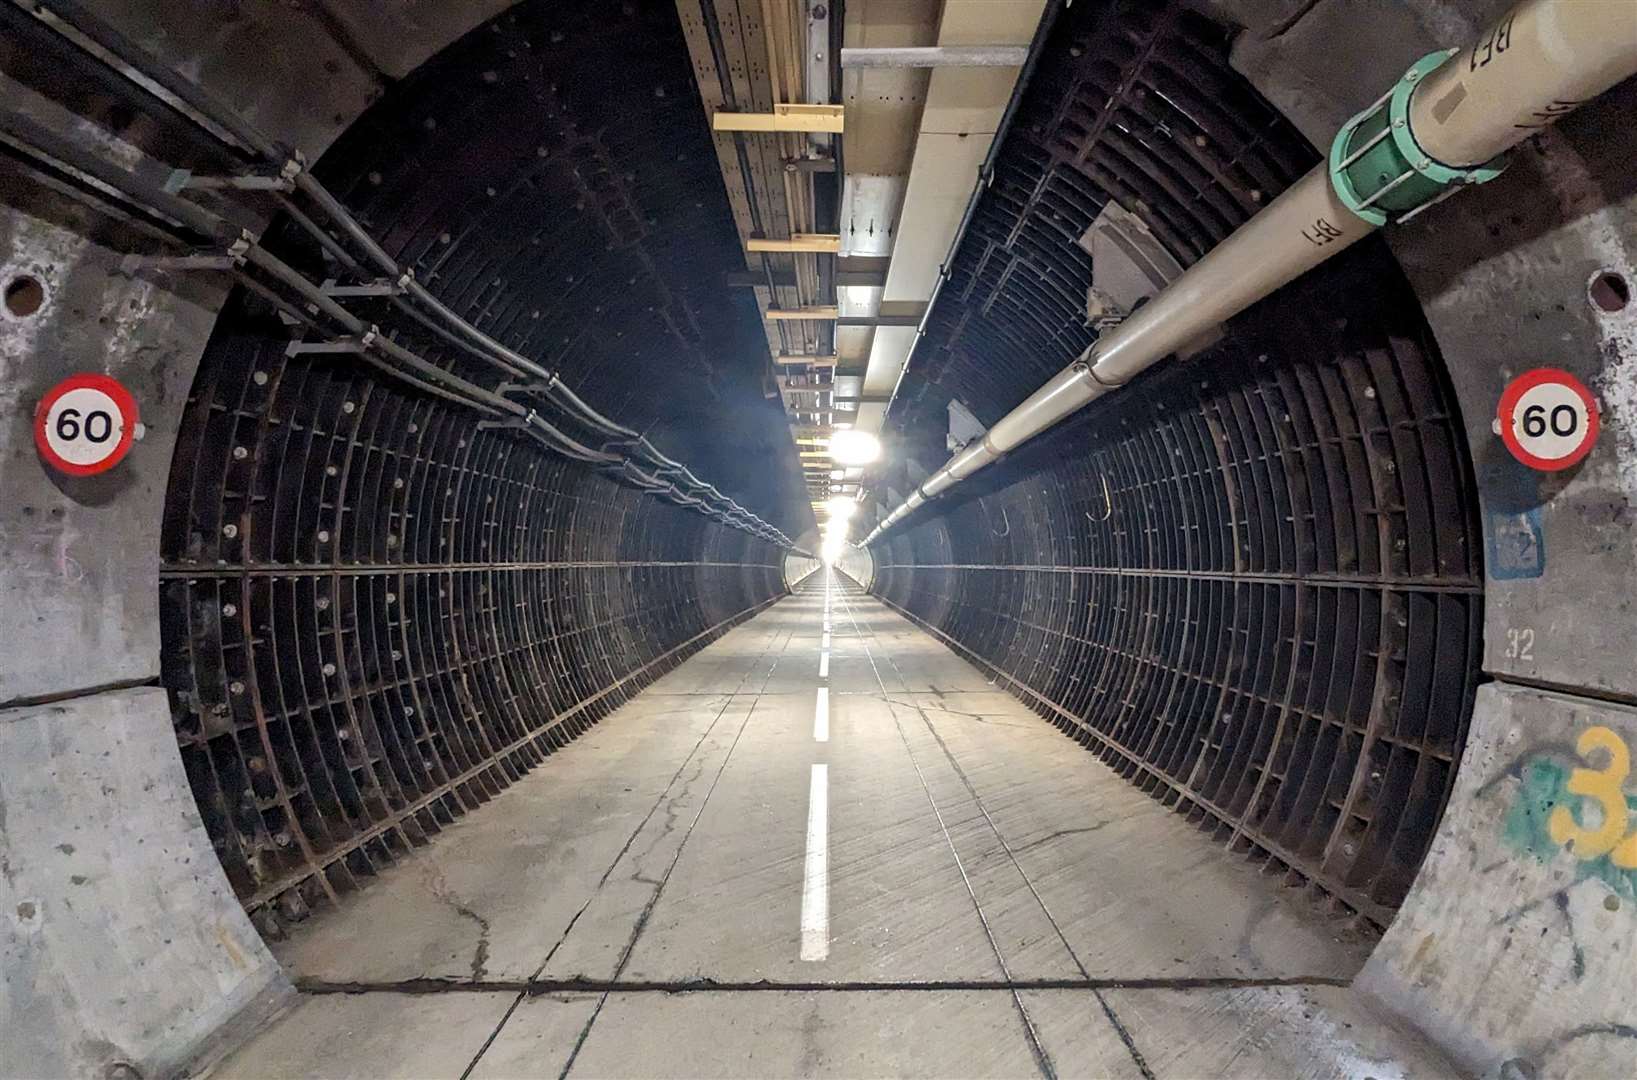 Looking inside the service tunnel